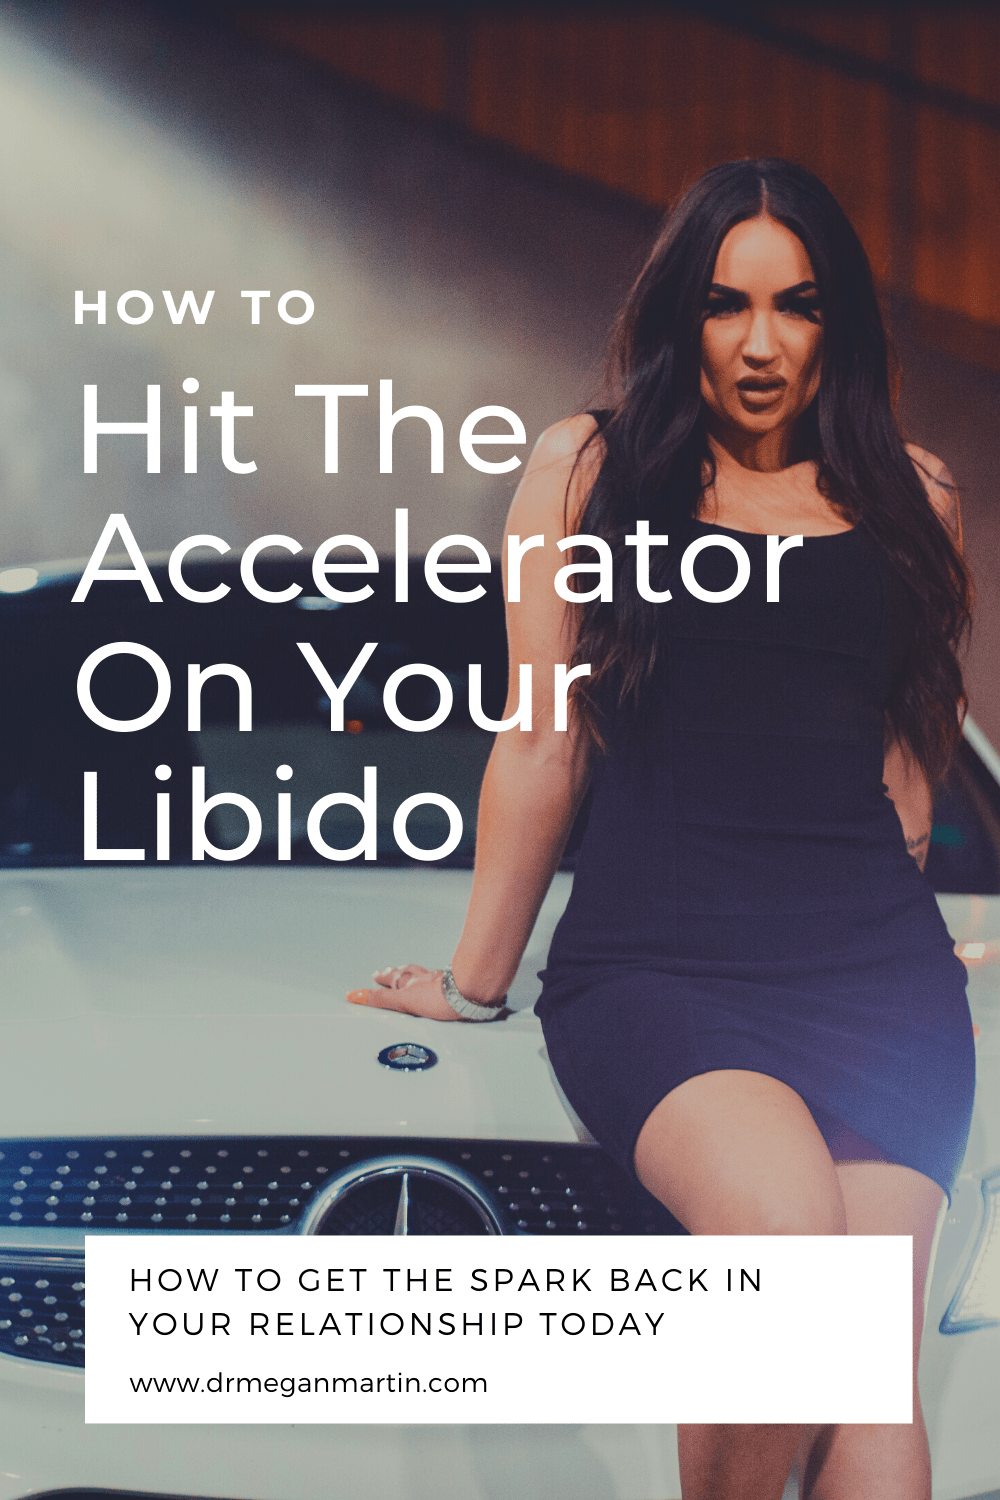 Hit the accelerator on your libido